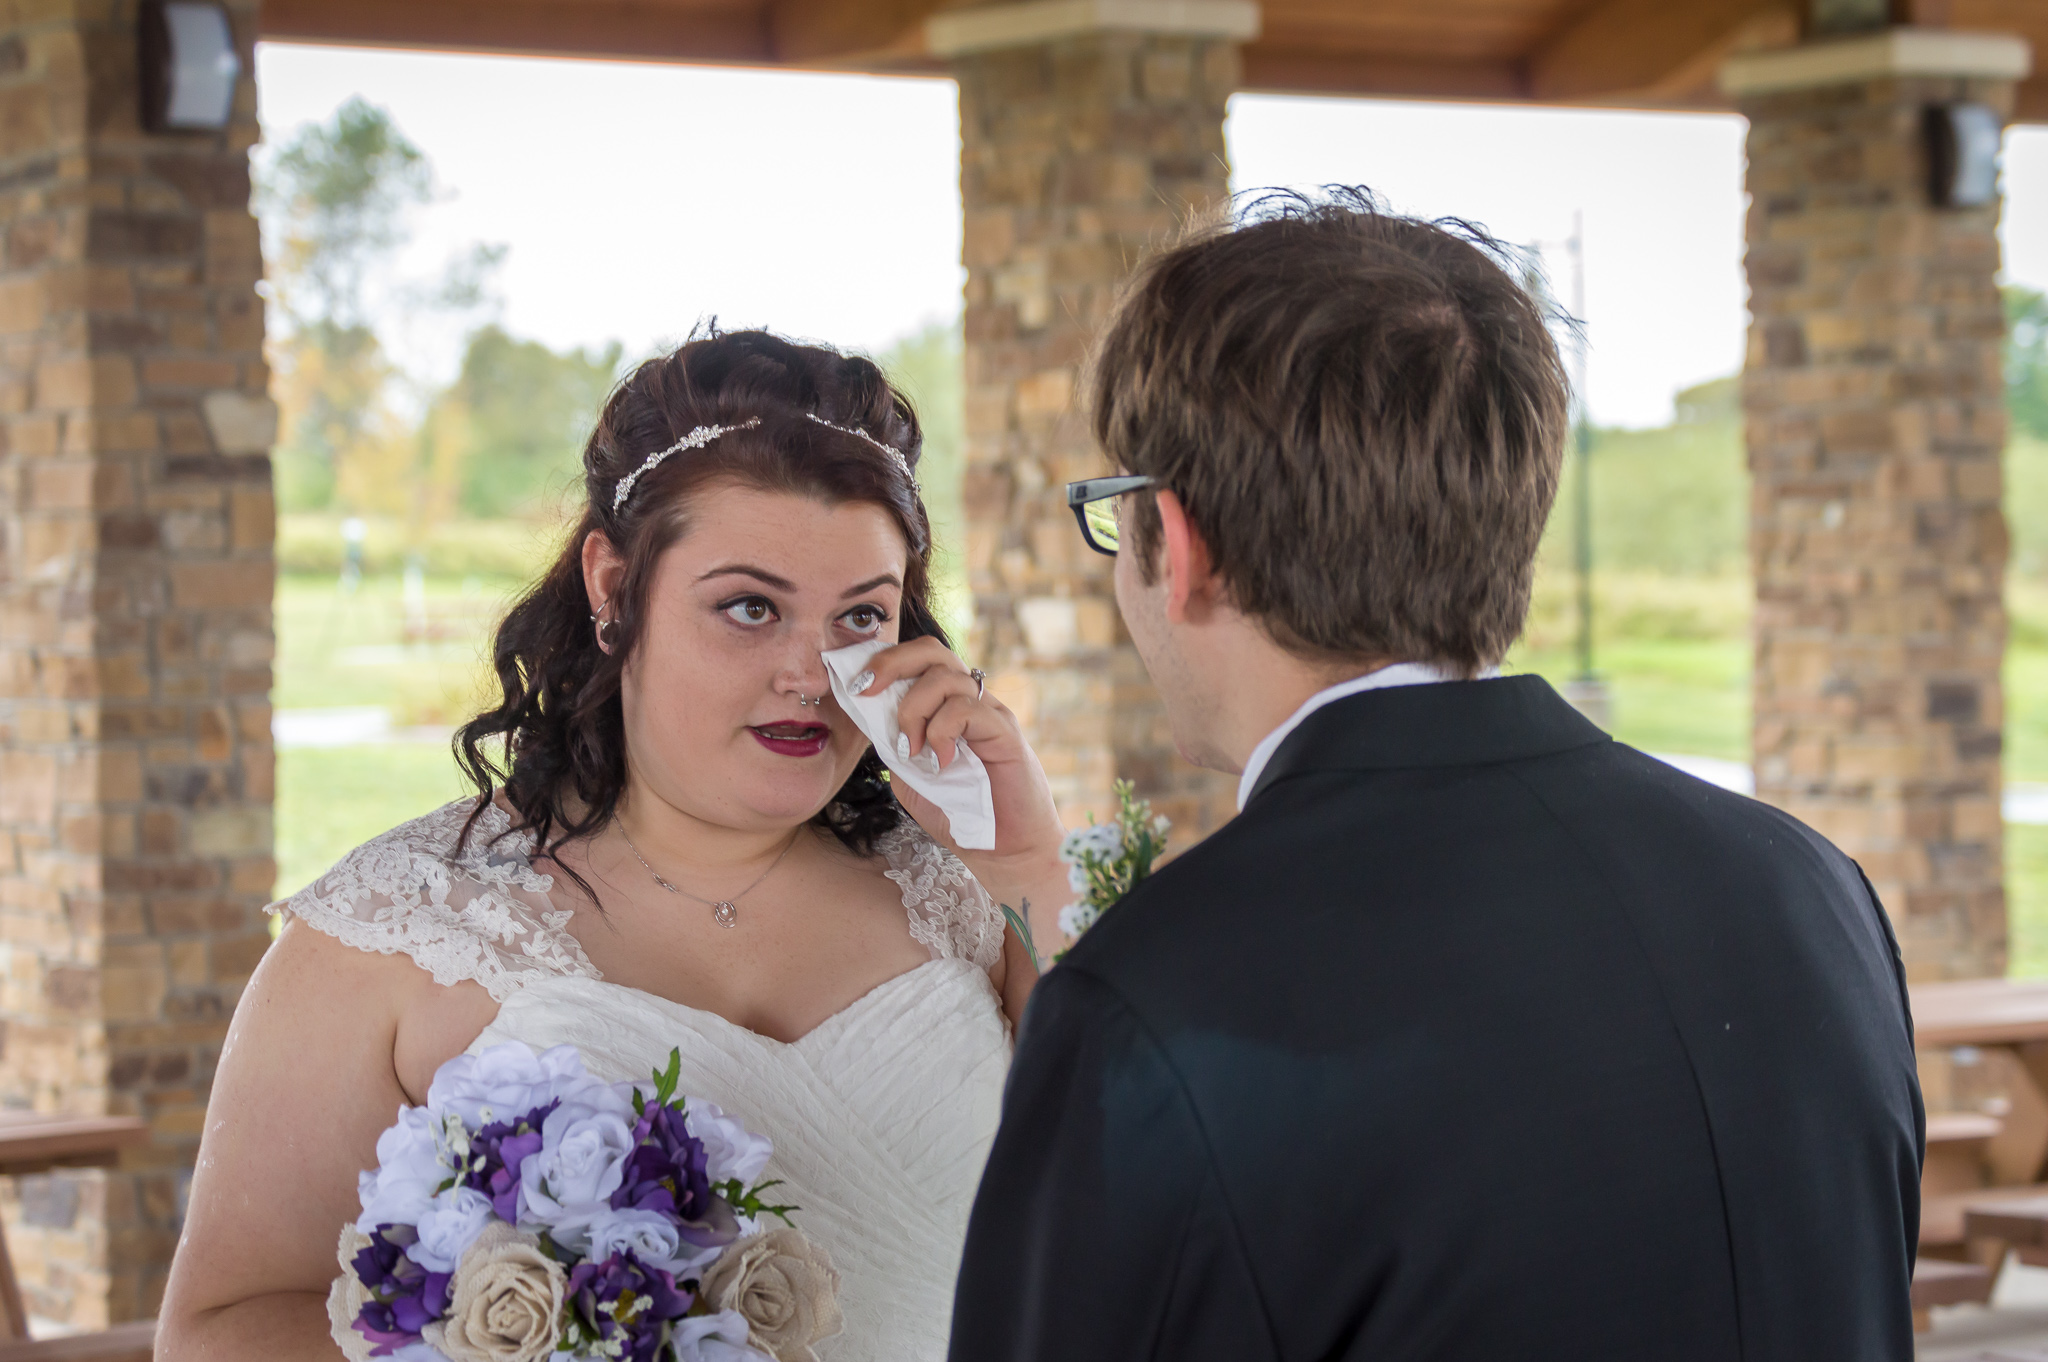 Bride wipes away a tear after seeing groom for the first look.